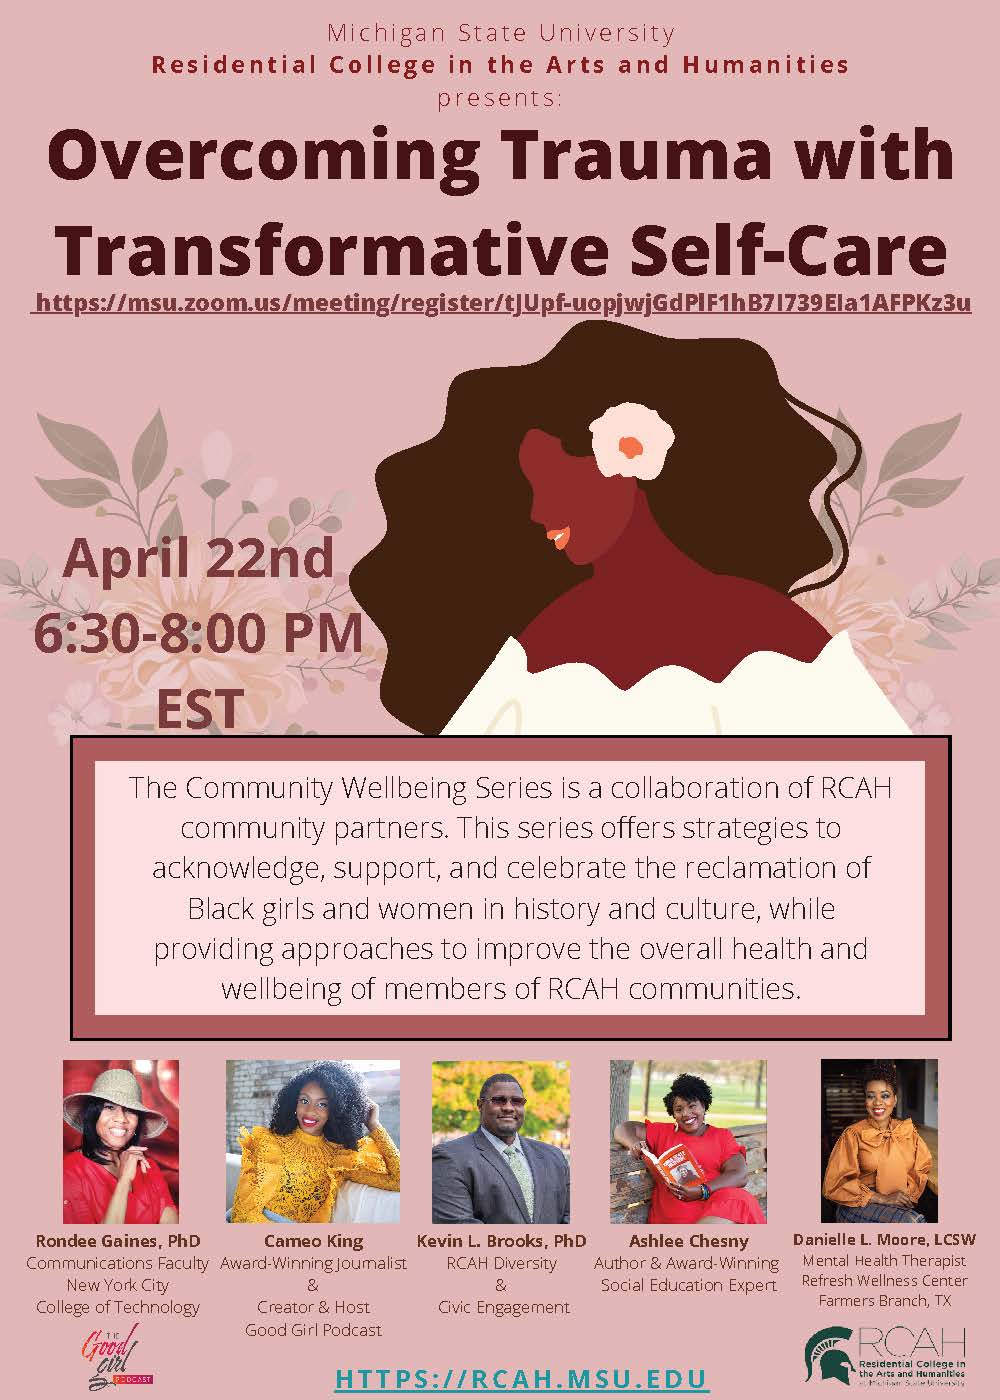 Image is a flyer with a flat graphic illustration of a Black woman with luscious flowing natural hair surrounded by blooming flowers. Text reads "Overcoming Trauma with Transformative Self-Care" and other details readable in the pdf.